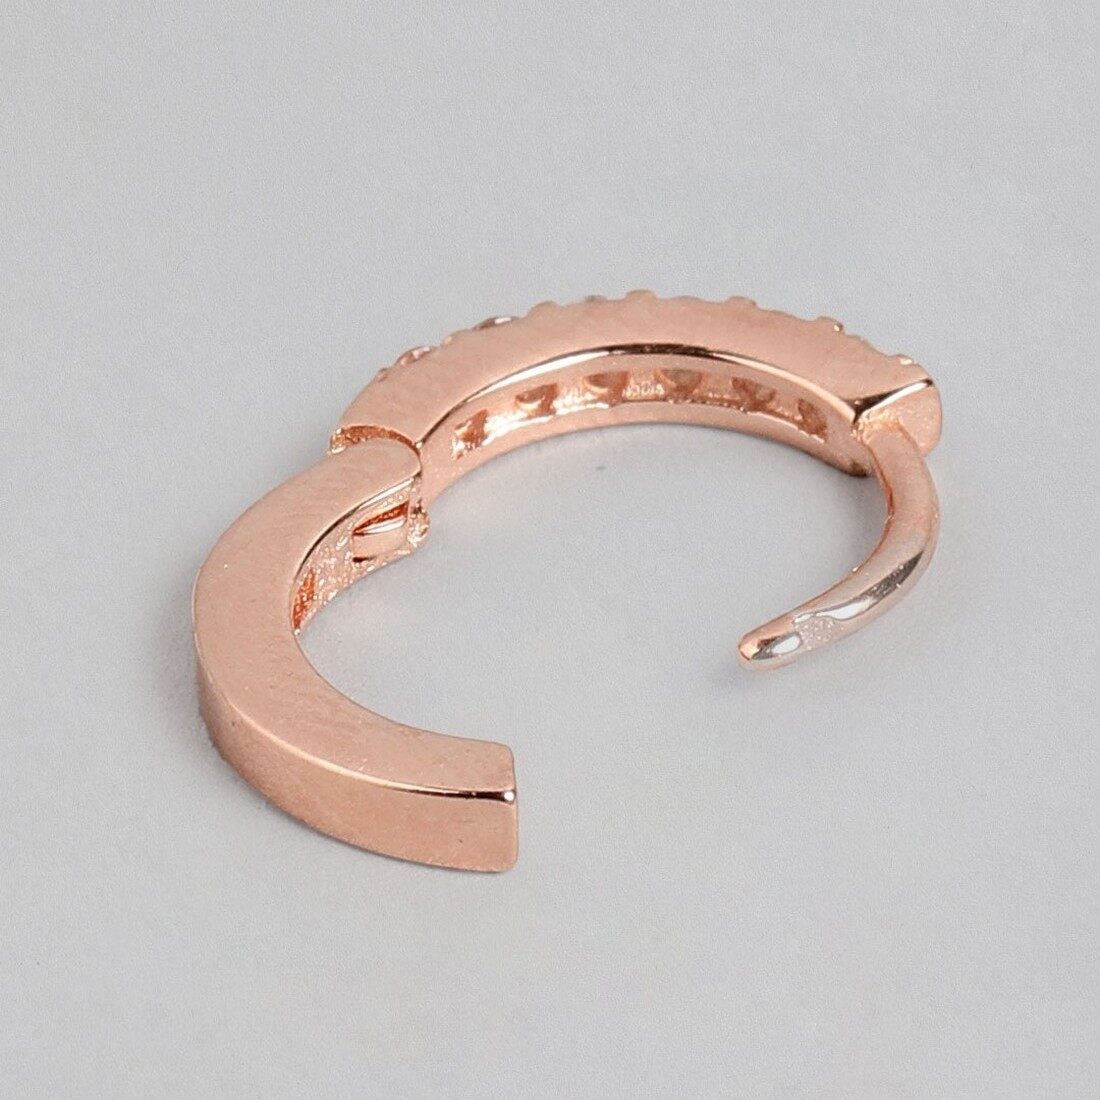 The Classic Rose Gold Moment Hoop 925 Silver Earrings